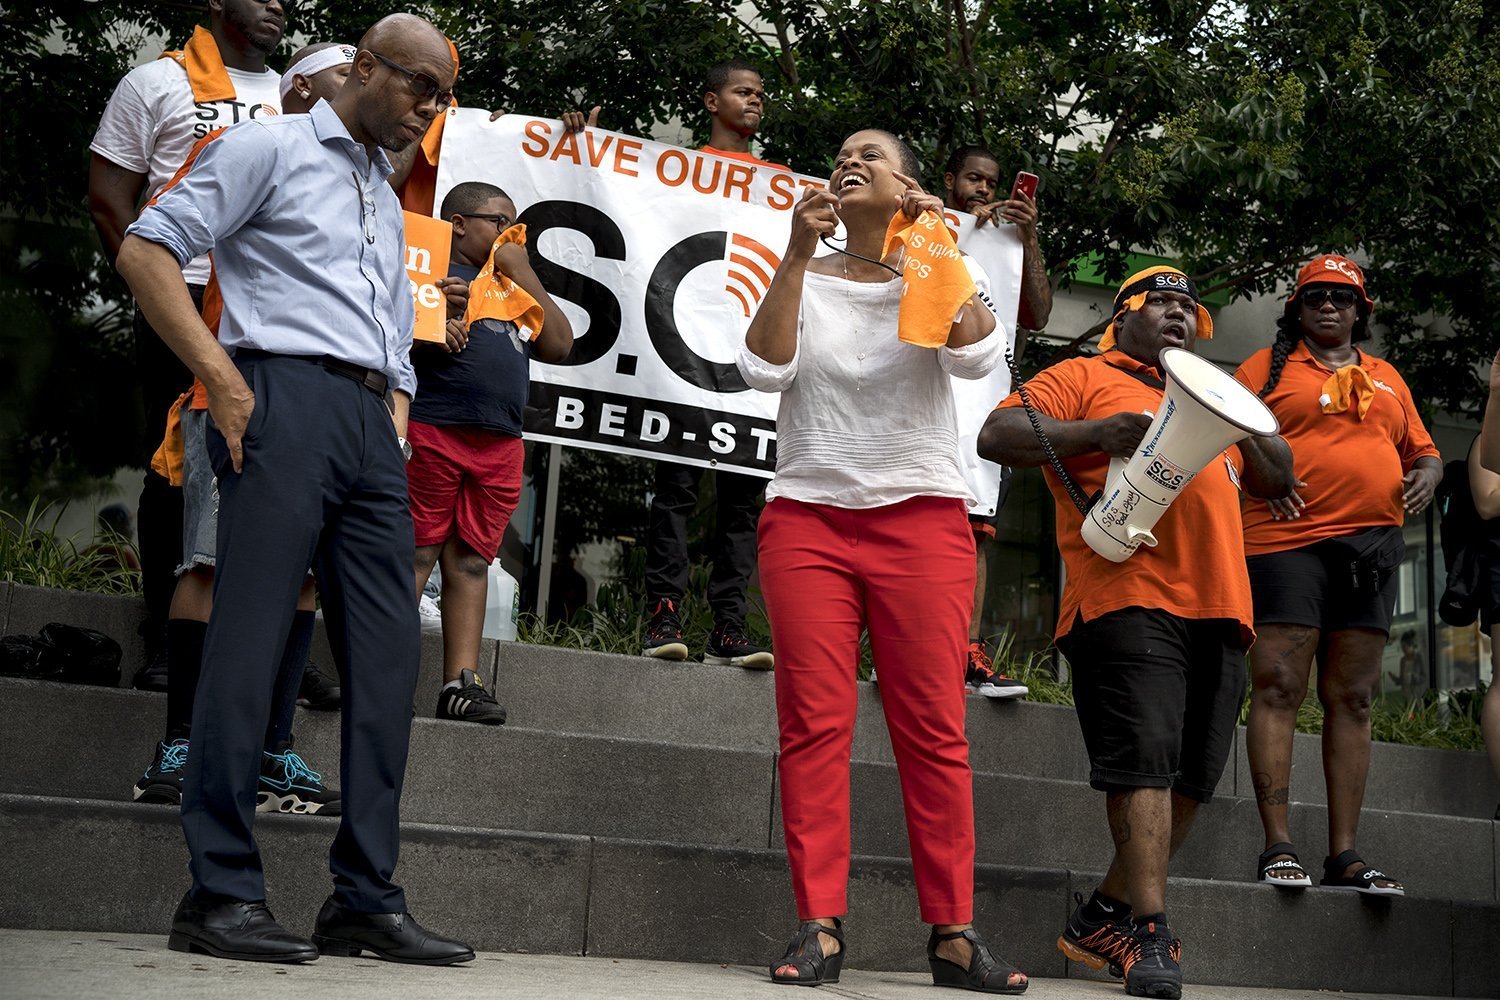 Assemblywoman Tremaine Wright (center) and VIDA President and District Manager of Brooklyn Community Board Henry L. Butler (left) joined the rally on Saturday. (Photo by Tsubasa Berg)